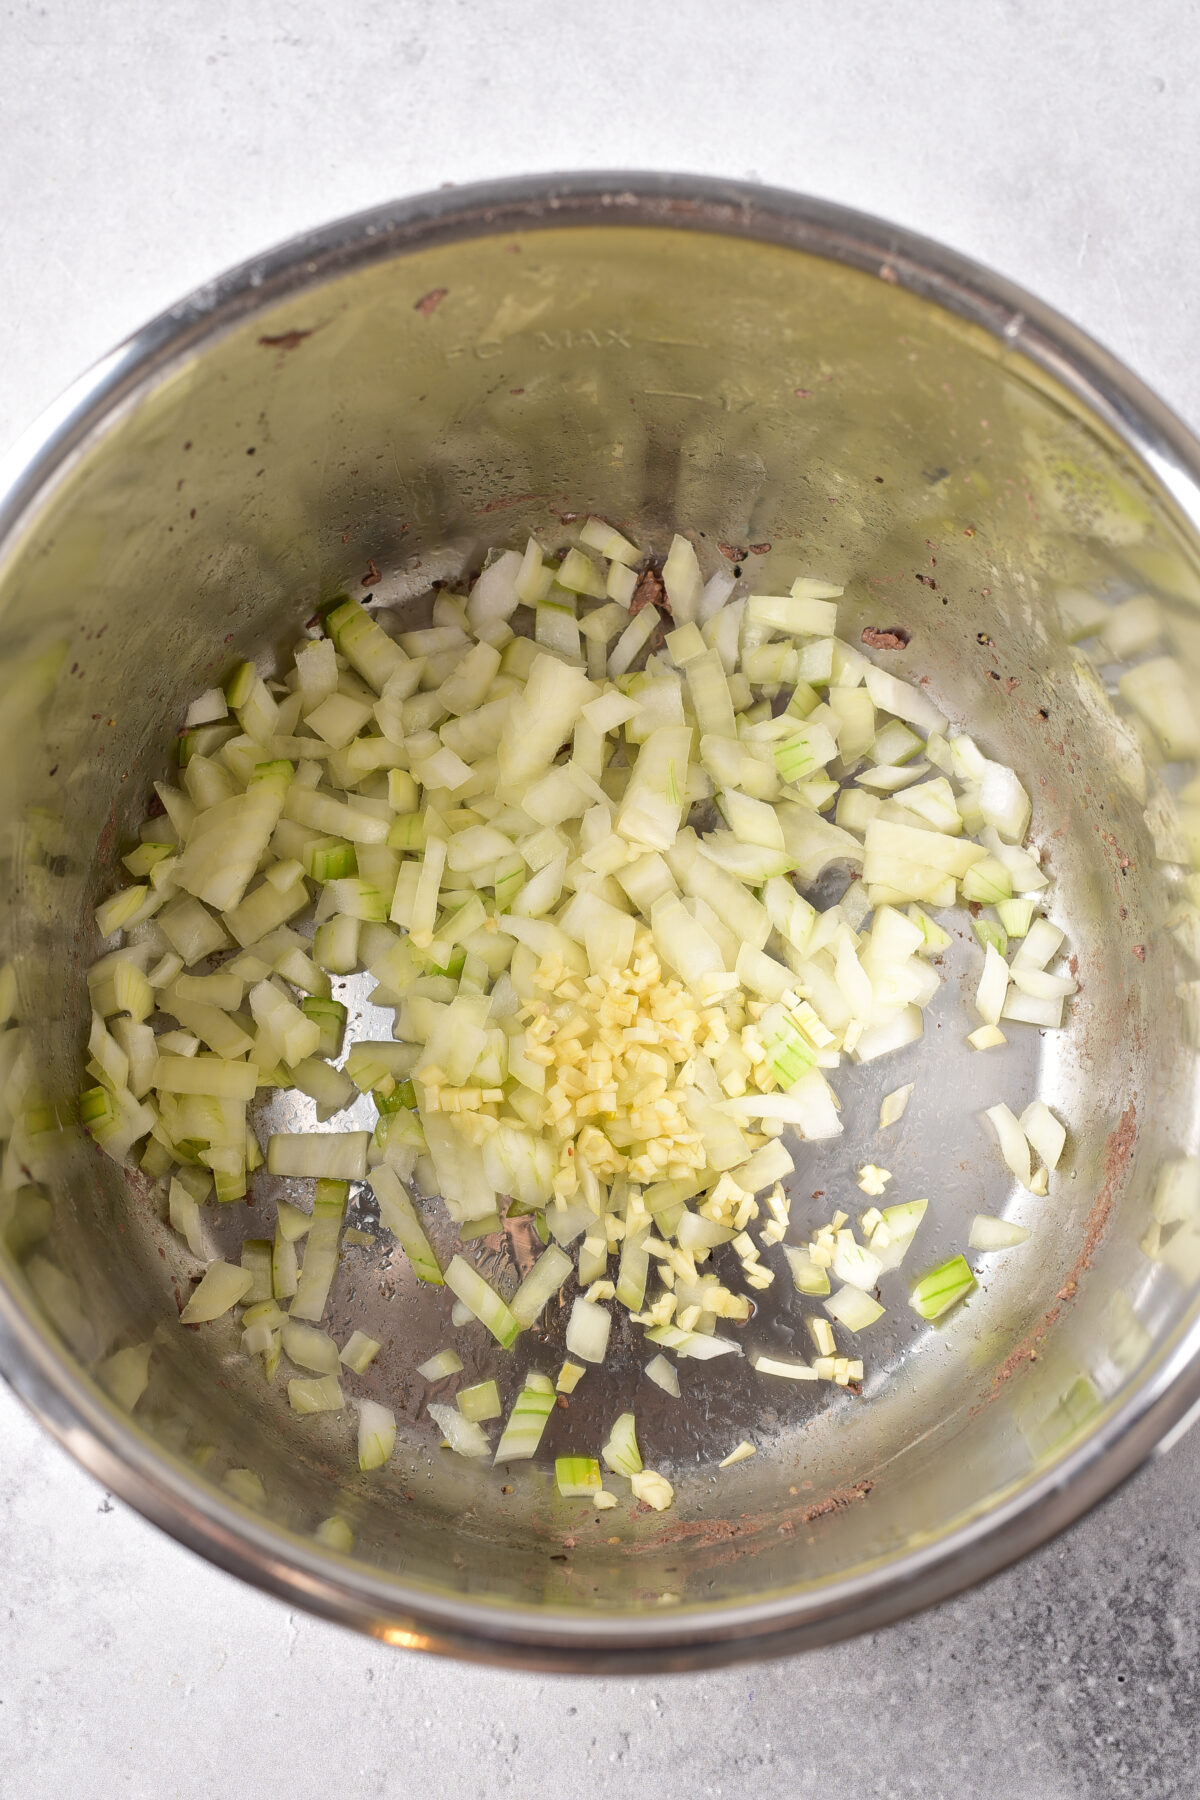 Onions and garlic cooking in the instant pot.